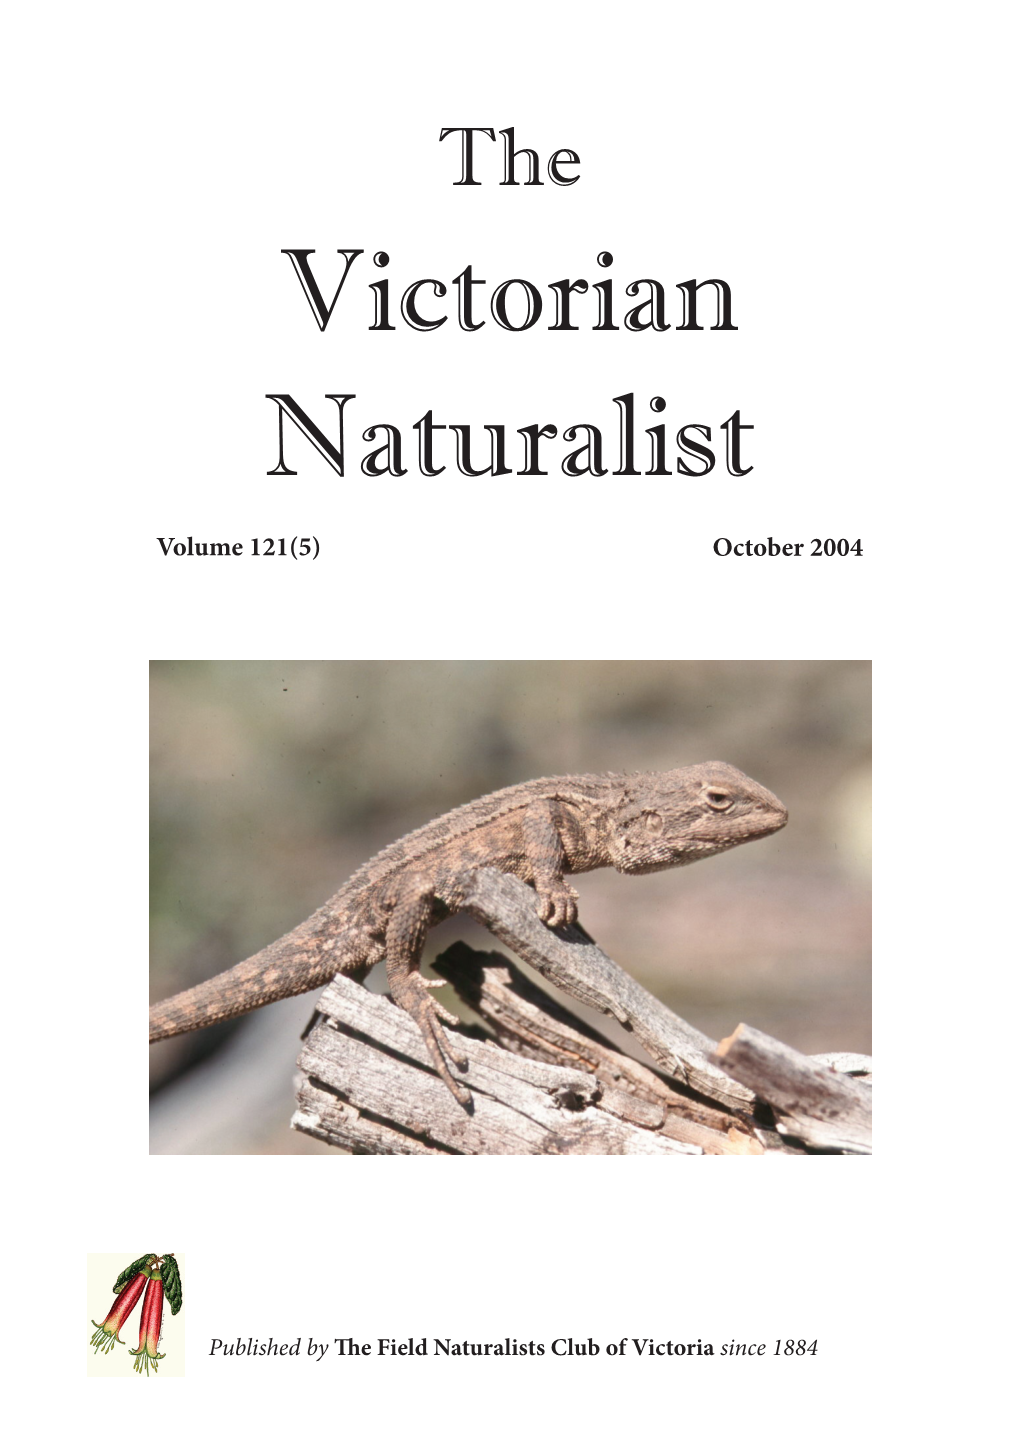 Distribution, Habitat Preferences and Conservation Status of Reptiles in the Albury-Wodonga Region